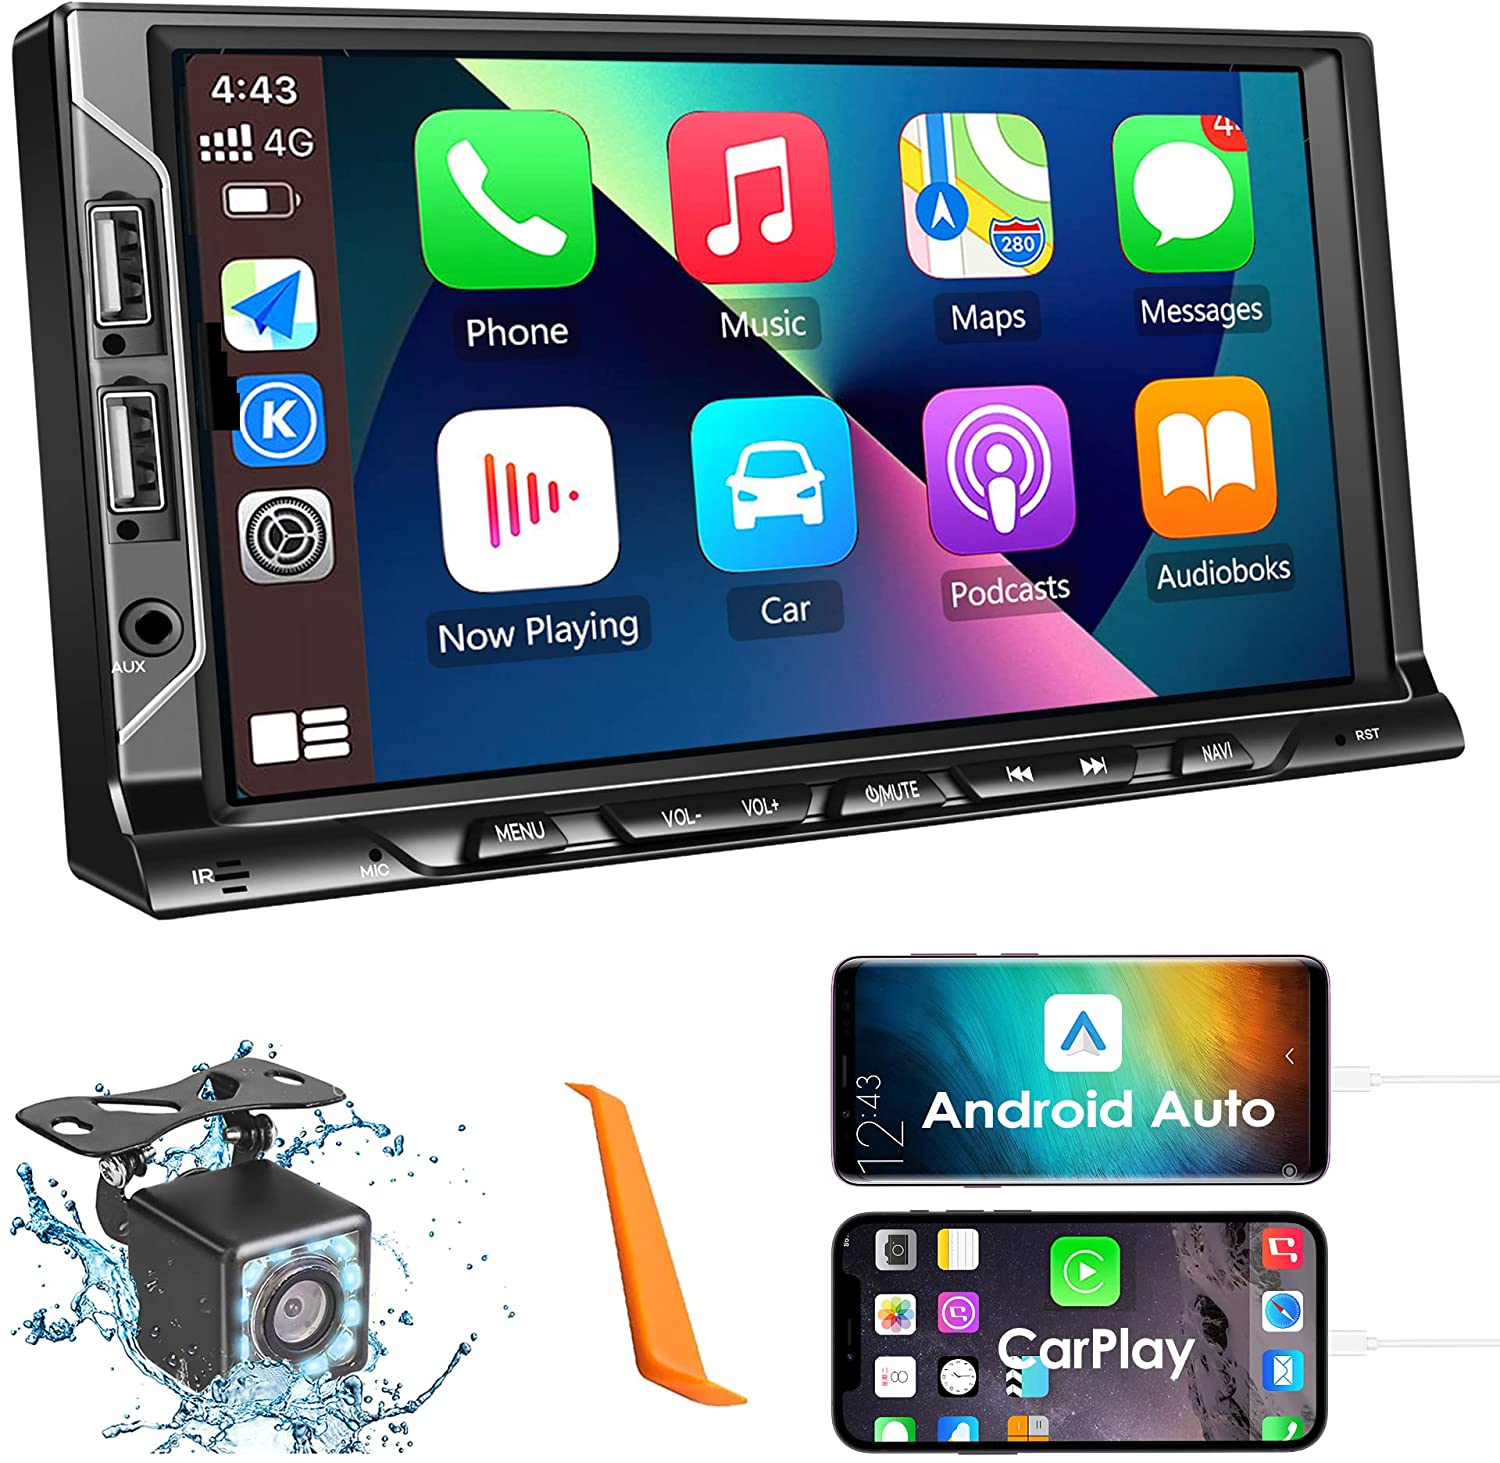 Avylet Bluetooth 5.0 Car Radio, Car Stereo Handsfree Calling Stereo &  Clock, FM/AM Radio USB/AUX in/MP3/SD MP3 Player, 7 LED Colors:  : Electronics & Photo